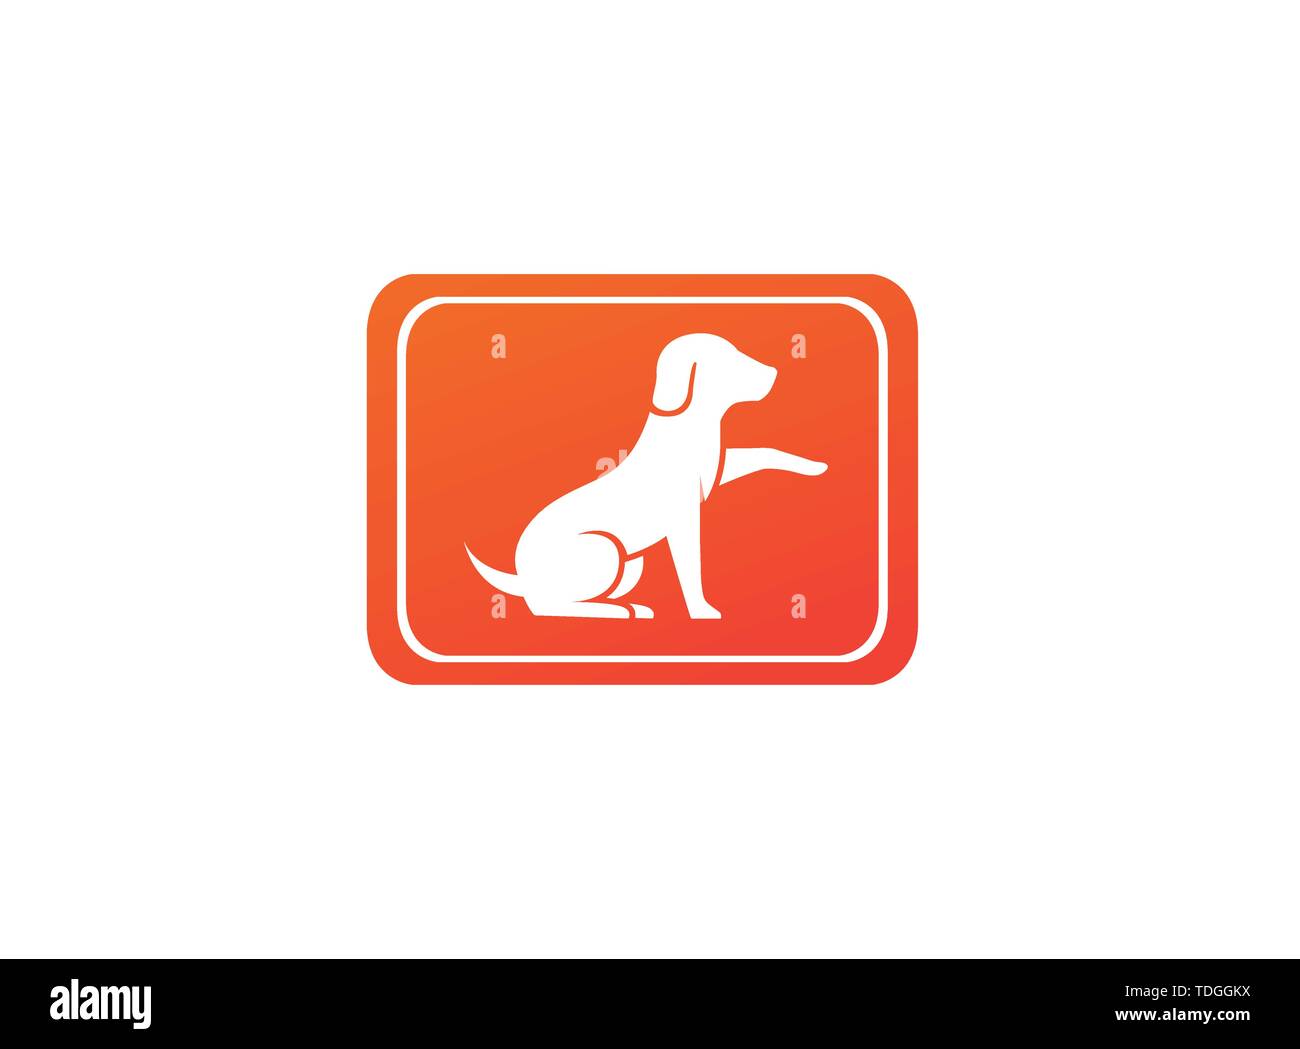 Cute dog sitting and Shaking hand in the shape logo design illustration Stock Vector